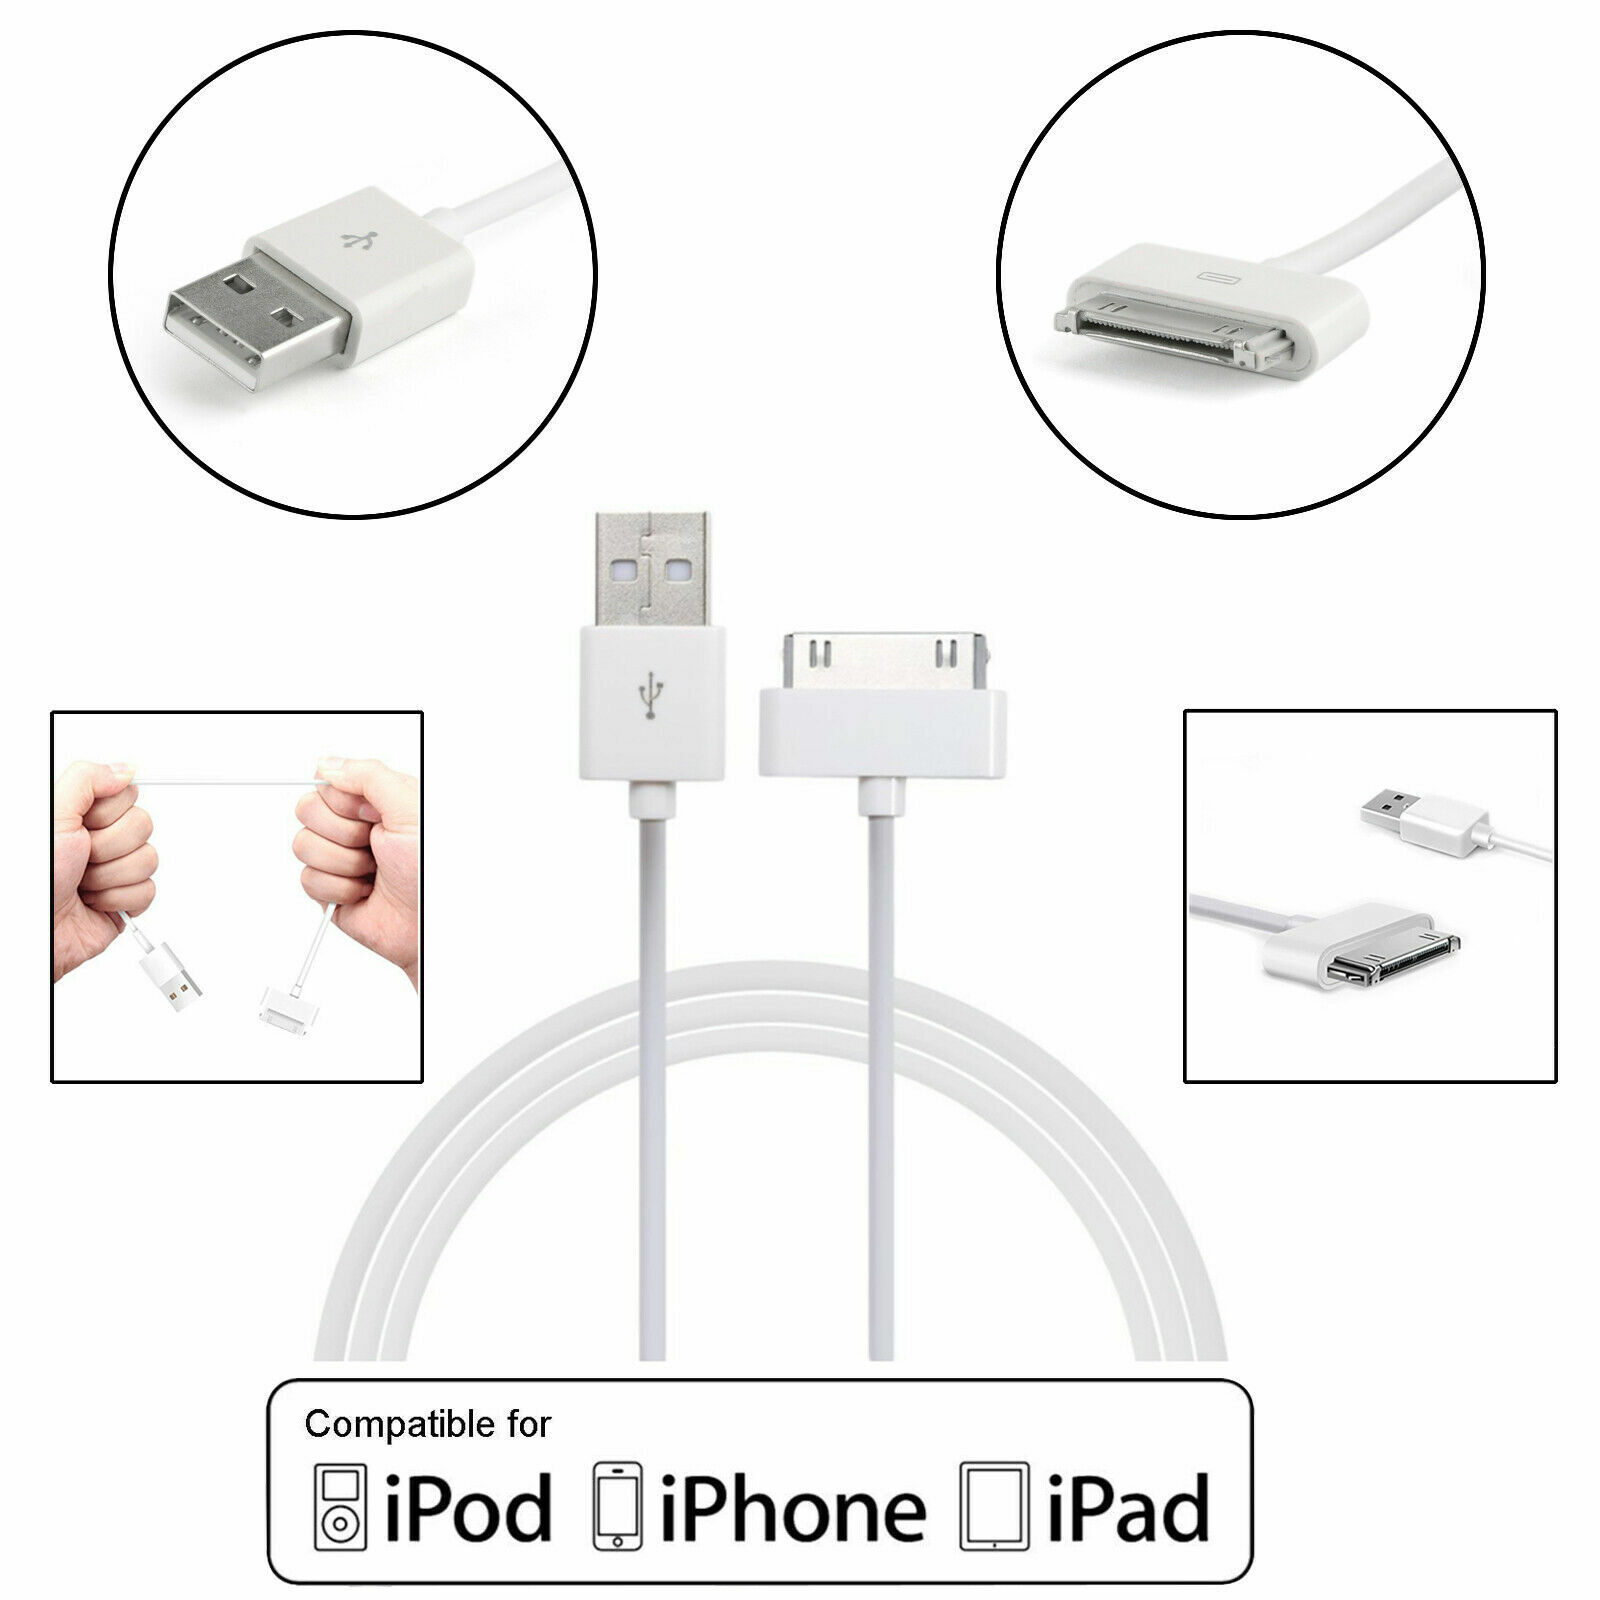 3Pack 30 pin USB Charging Data/Sync Cable Cord for iPad 1/2/3 iPod Nano 1-6 easybuystation Does Not Apply - фотография #3